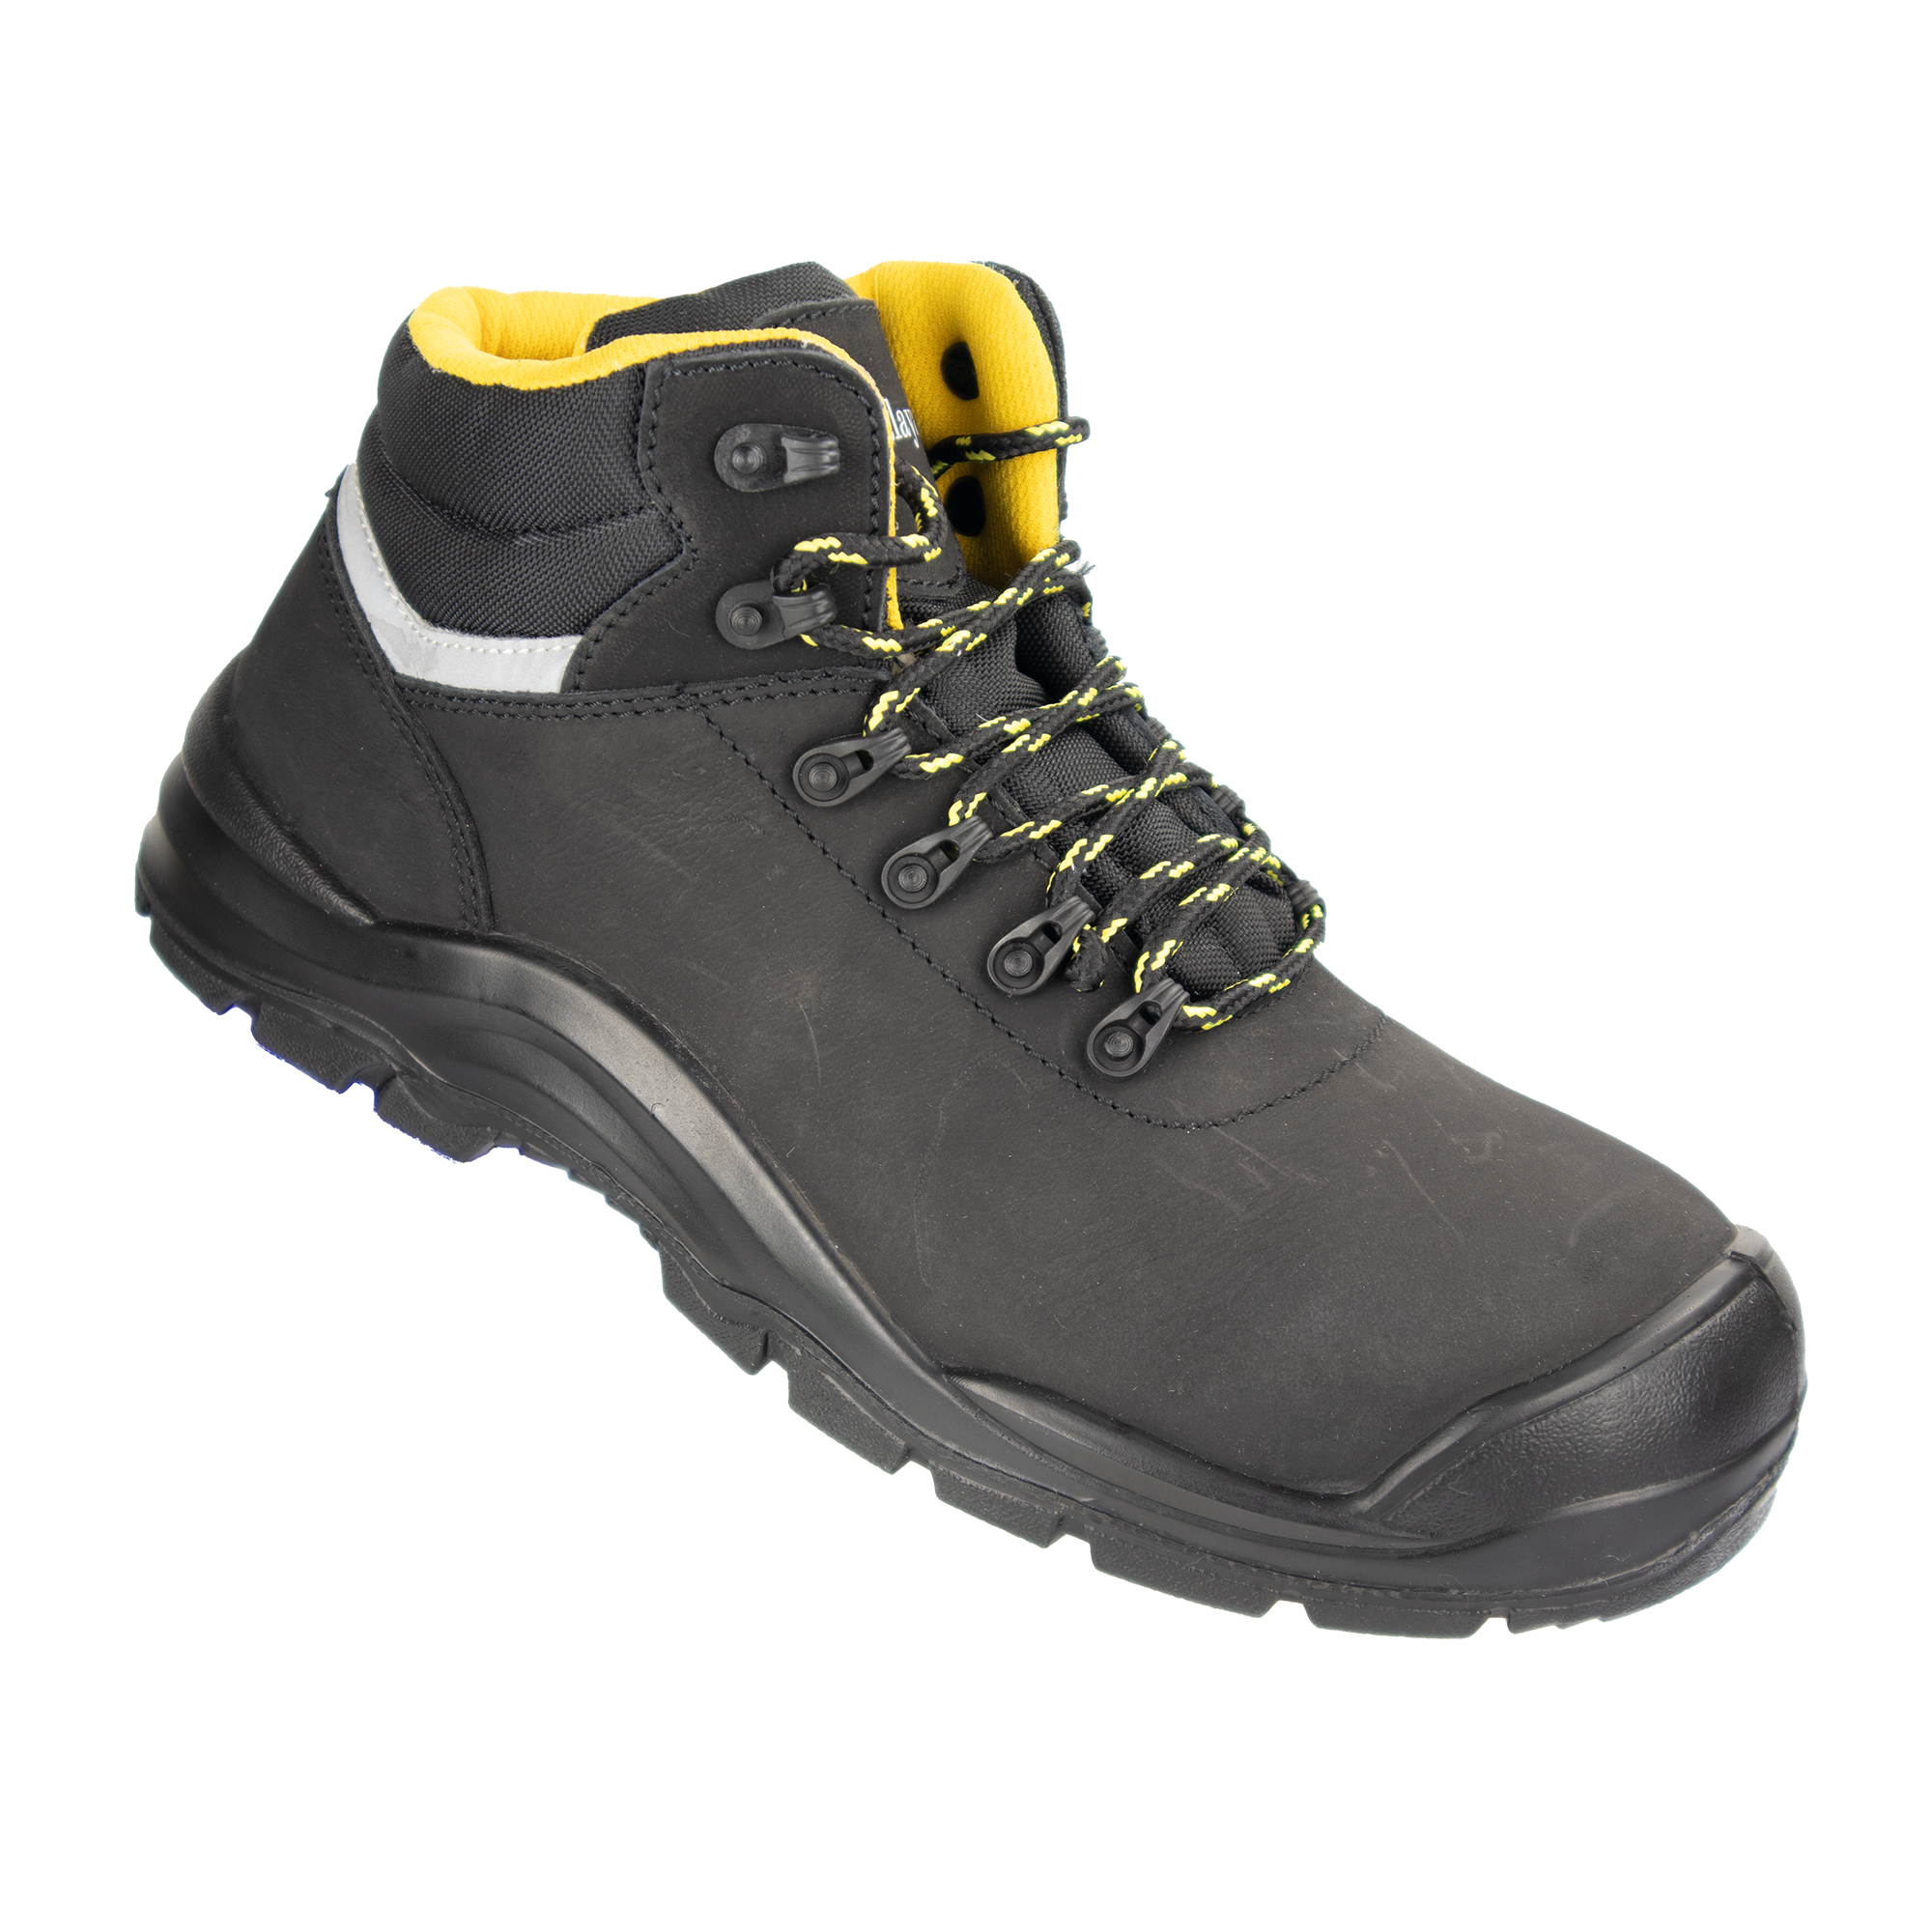 Himalayan Workwear - Mens Water Resistant Boots